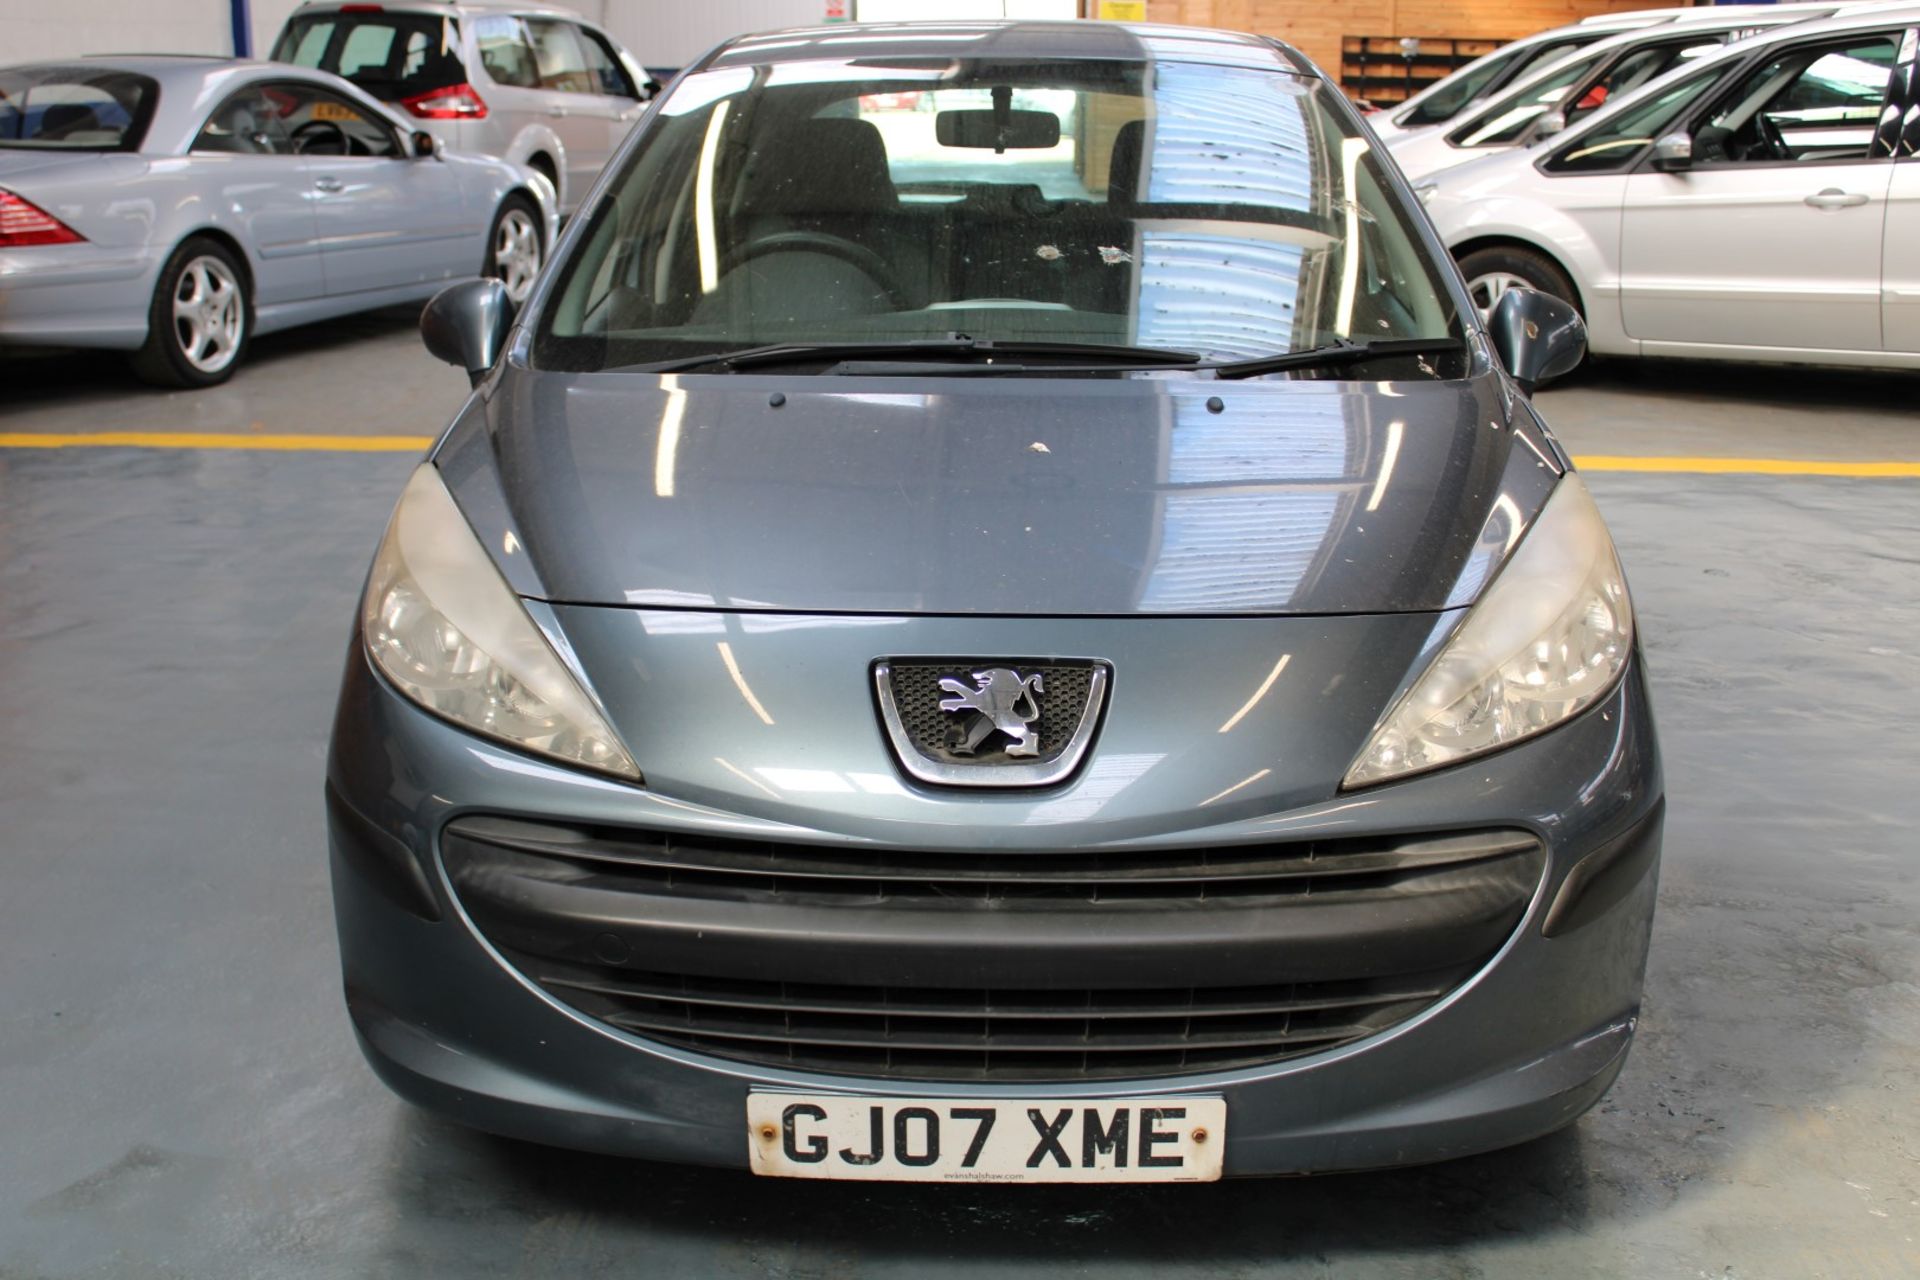 07 07 Peugeot 207 S - Image 2 of 28